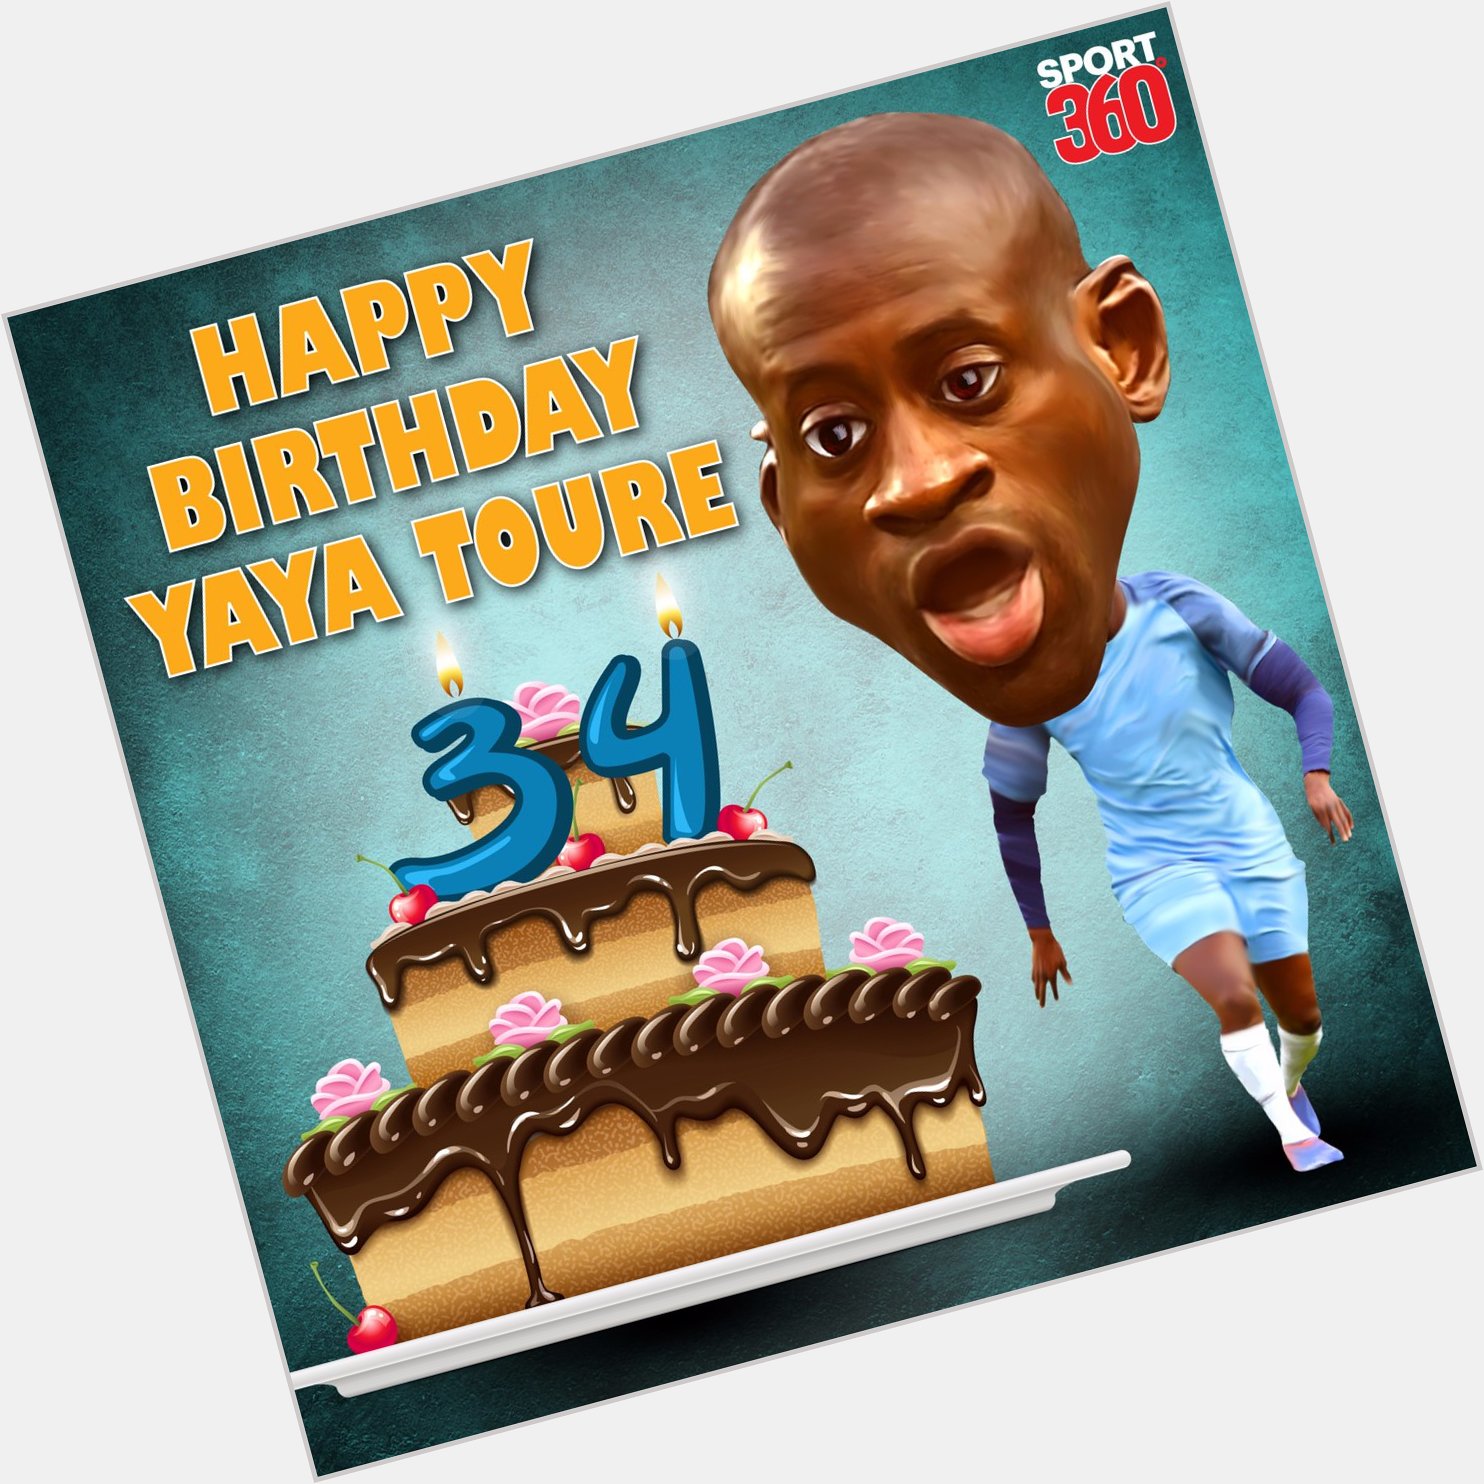 Happy Birthday Yaya Toure! Best wishes from the team at Enjoy your cake!       